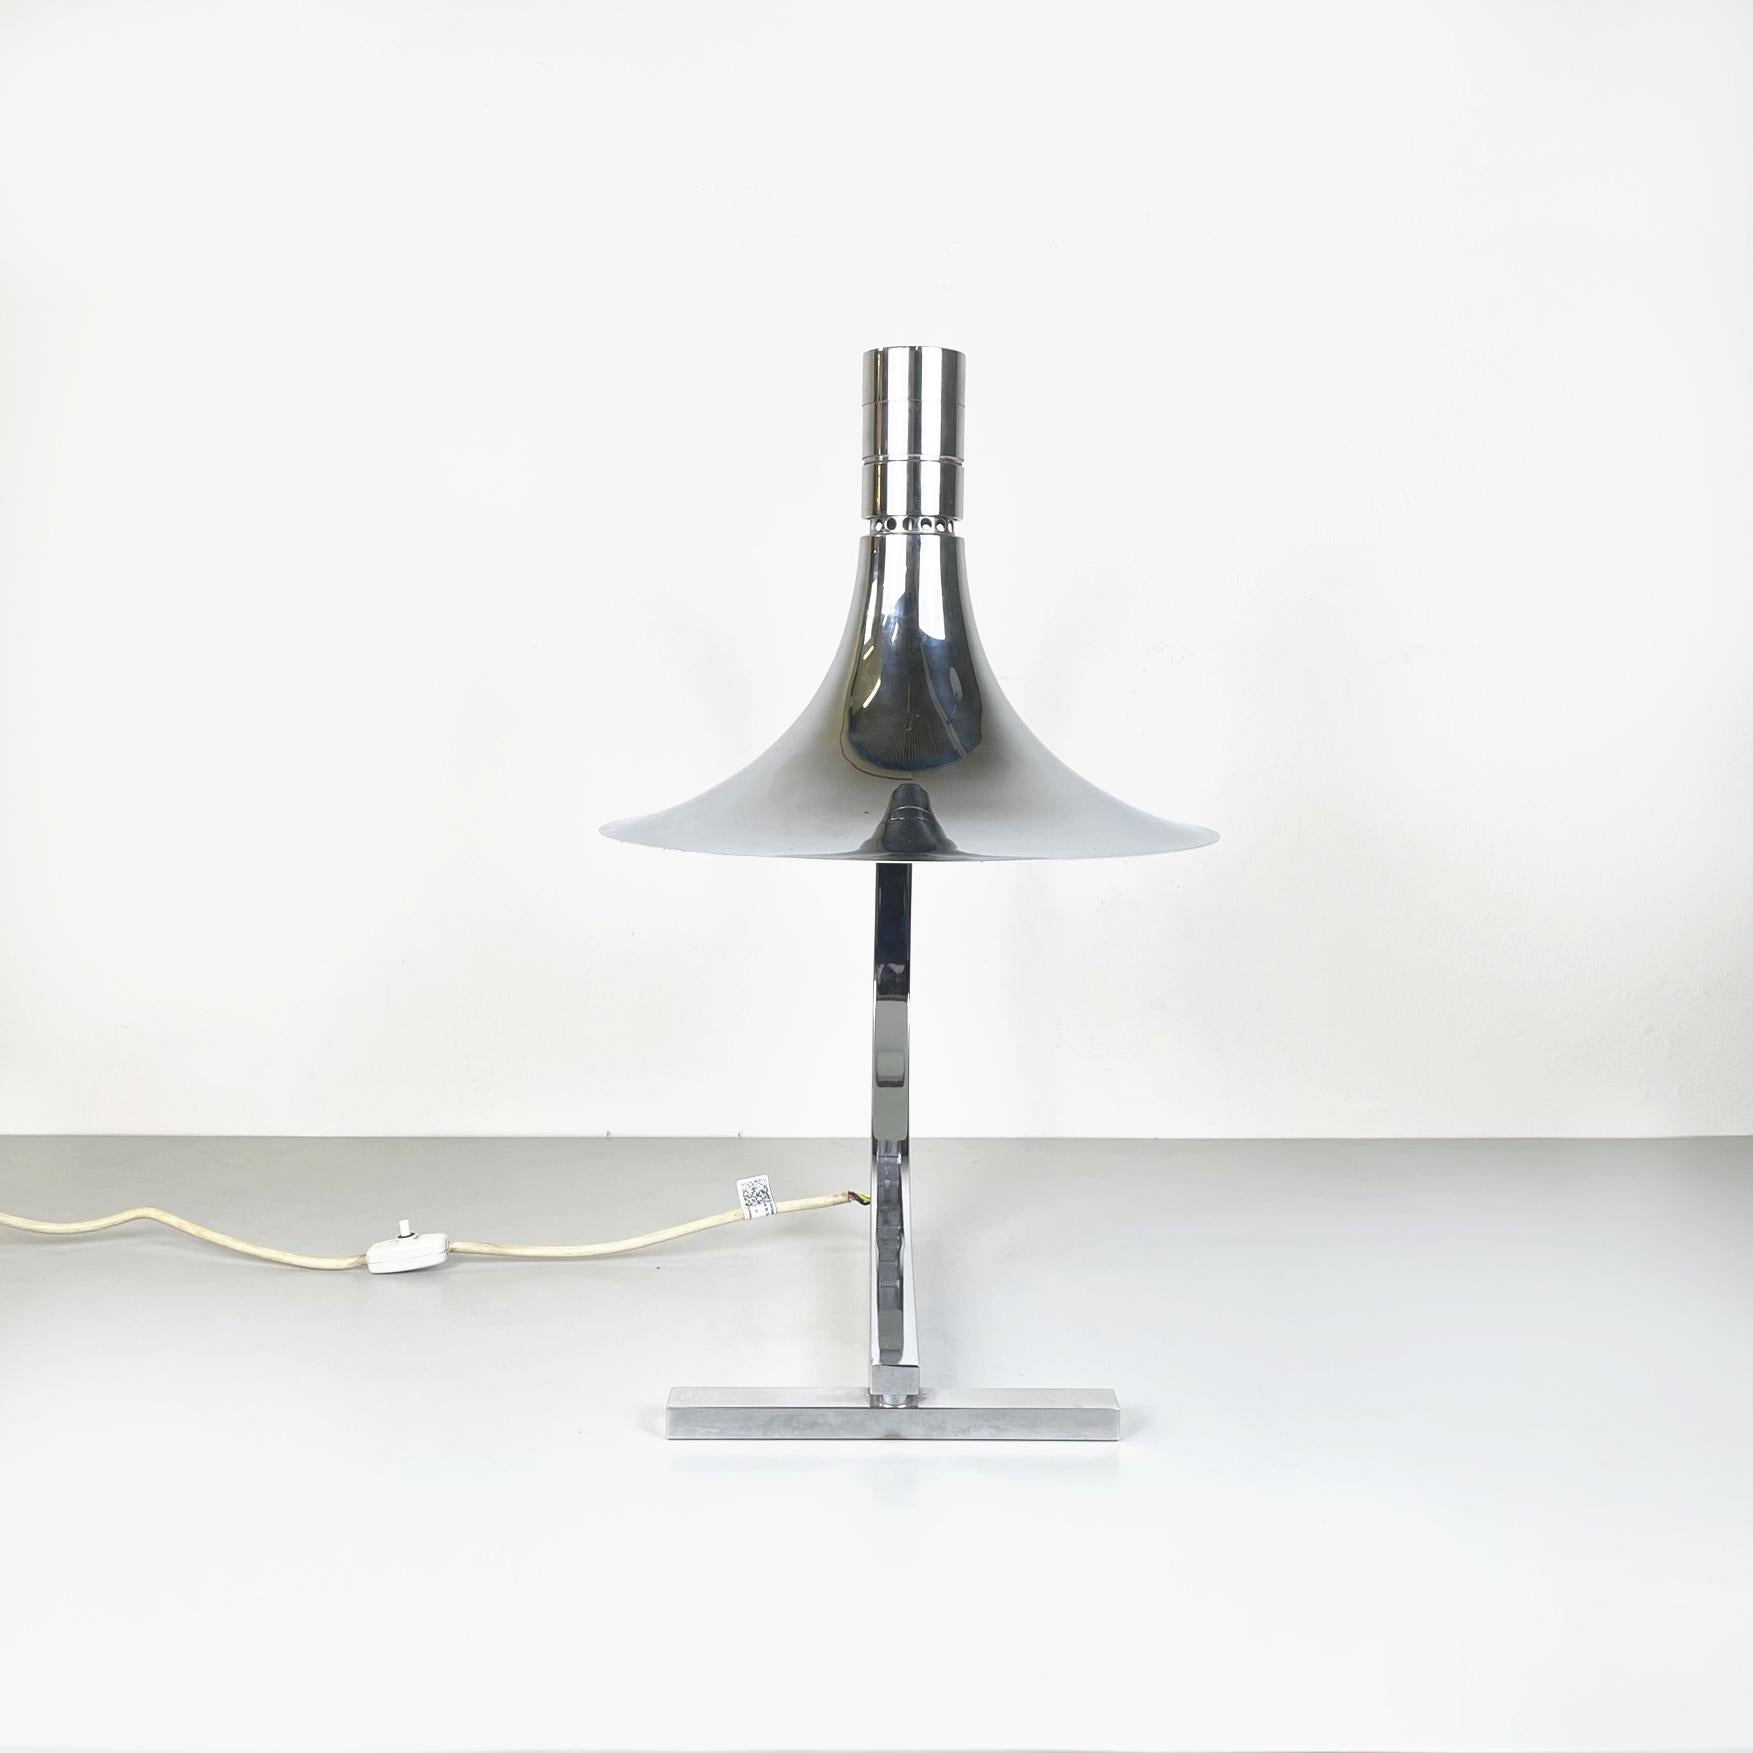 Late 20th Century Italian Space Age Steel Table lamp AM/AS by Albini and Helg for Sirrah, 1970s